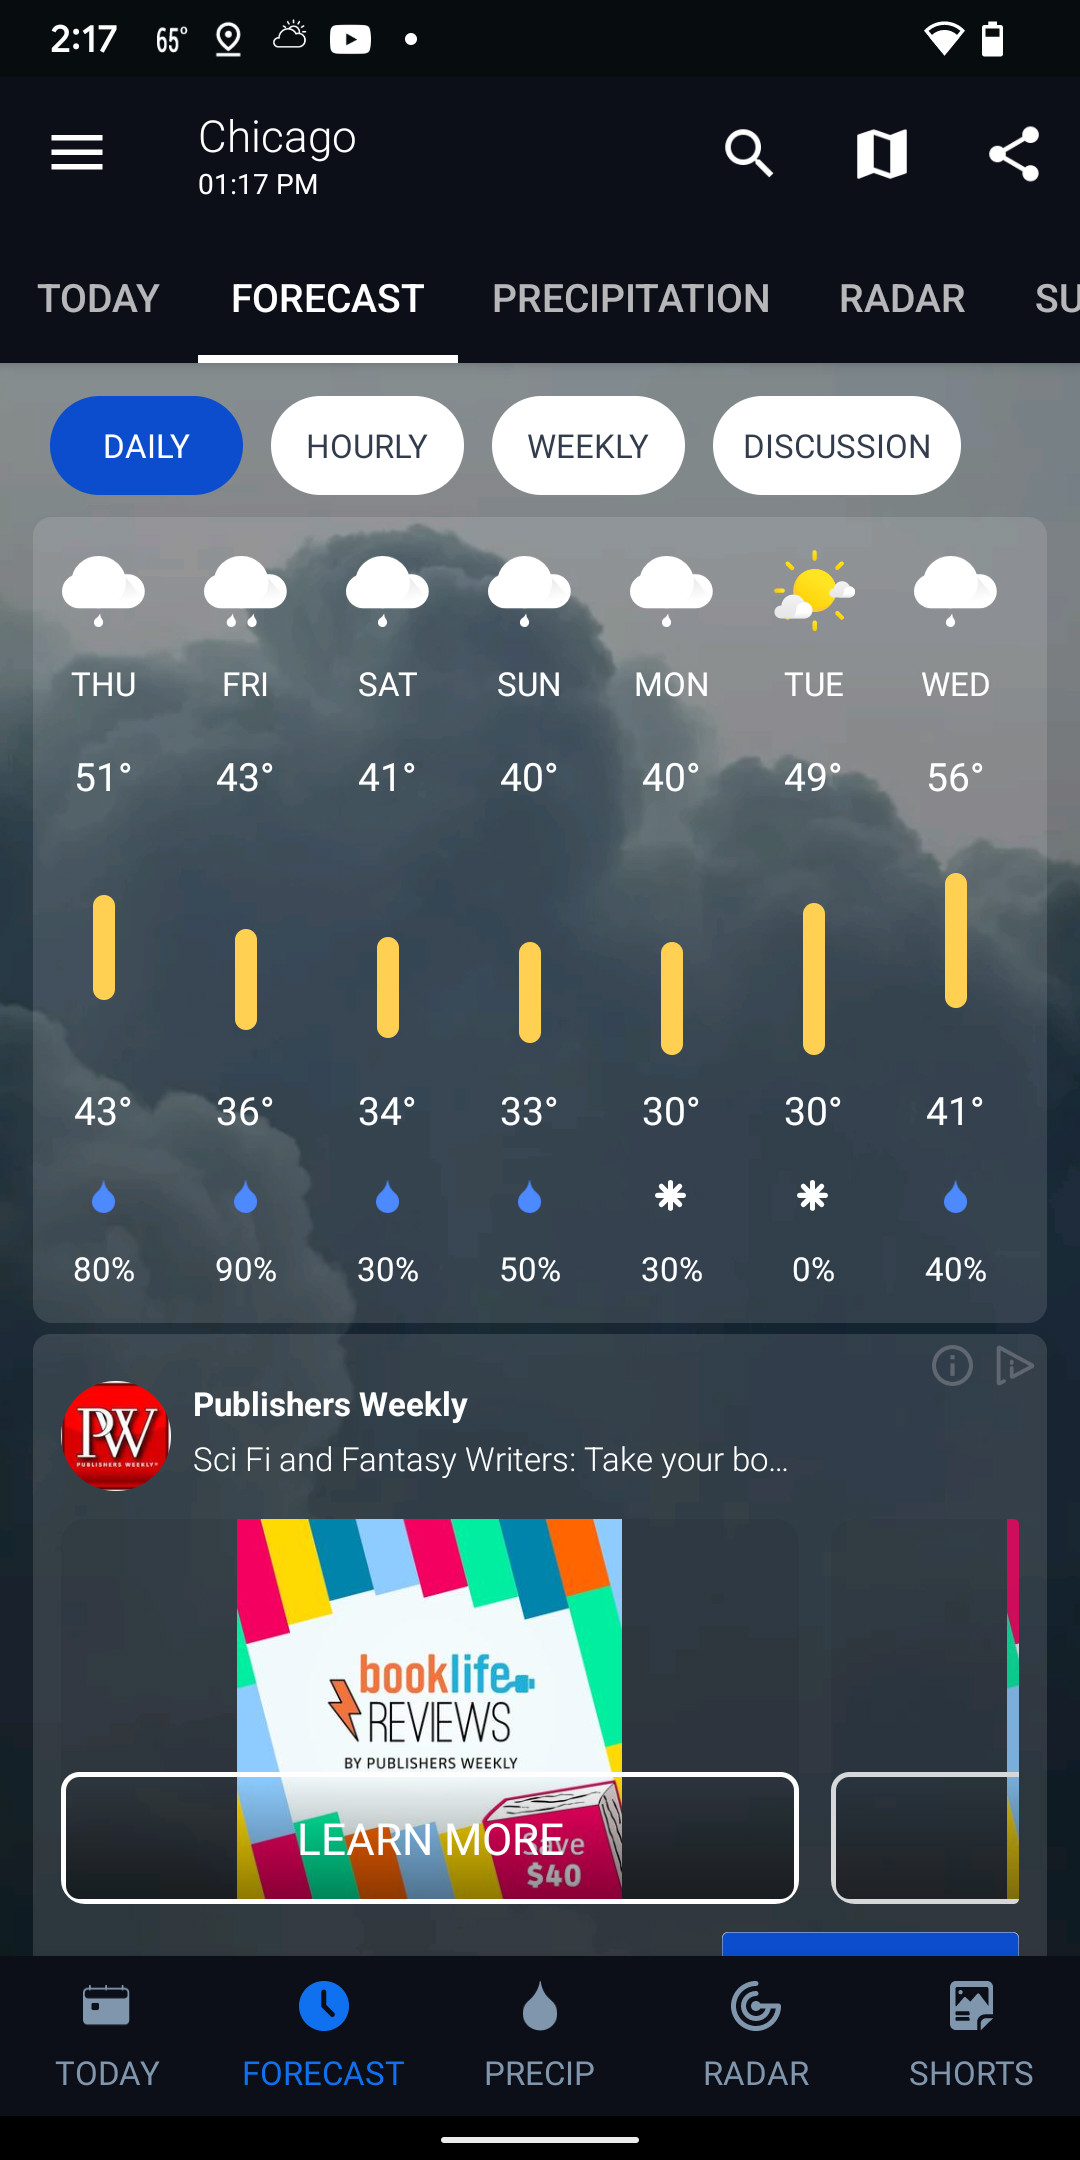 IWeather’s UI is frequently interrupted by ads.